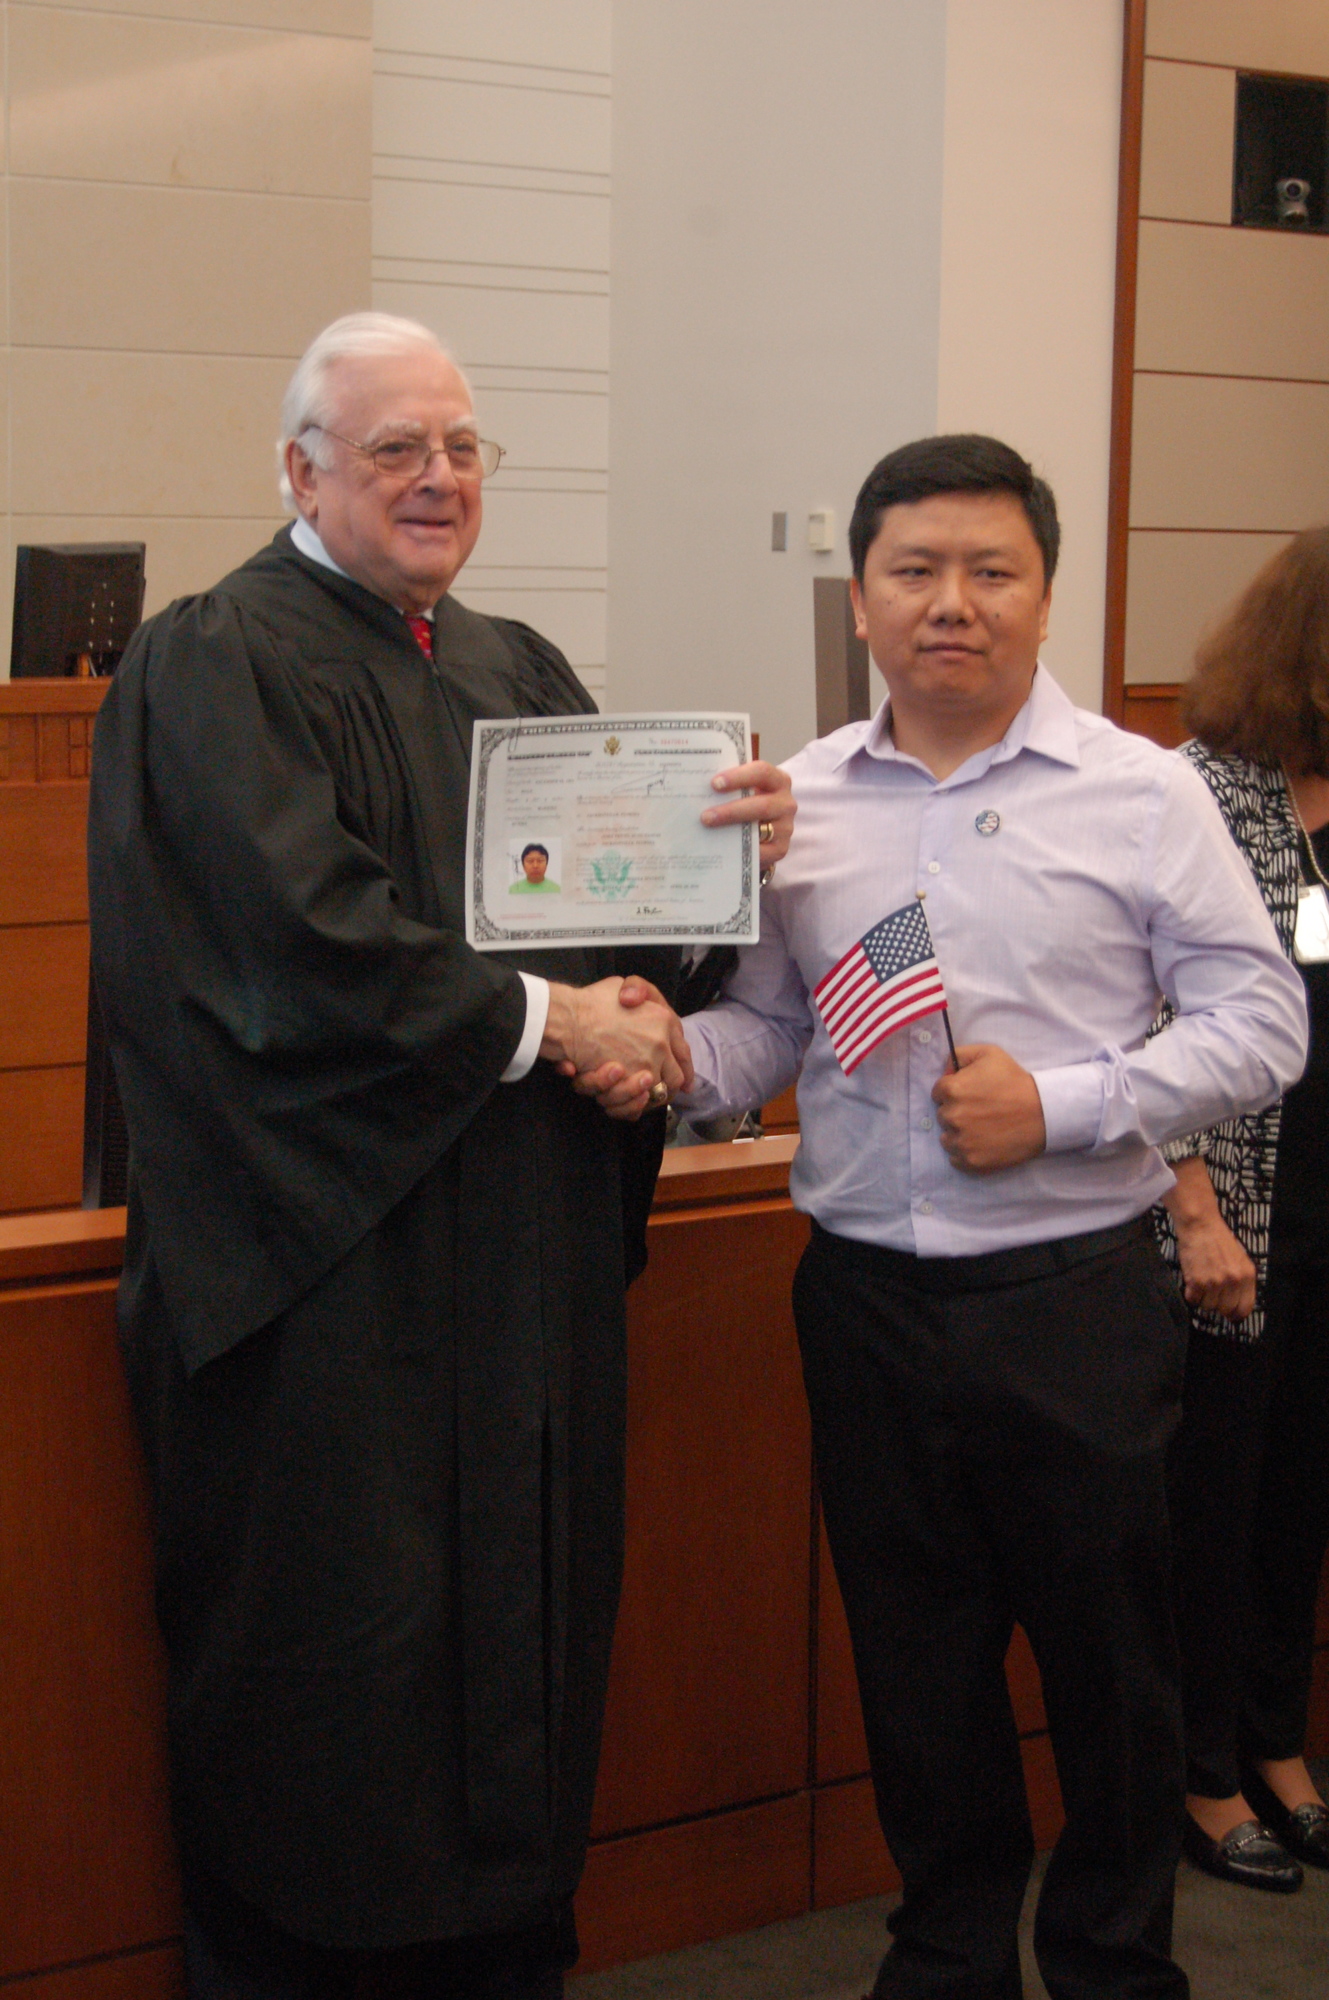 Senior U.S. District Judge Harvey Schlesinger presided at the ceremony and presented a certificate to each new citizen.